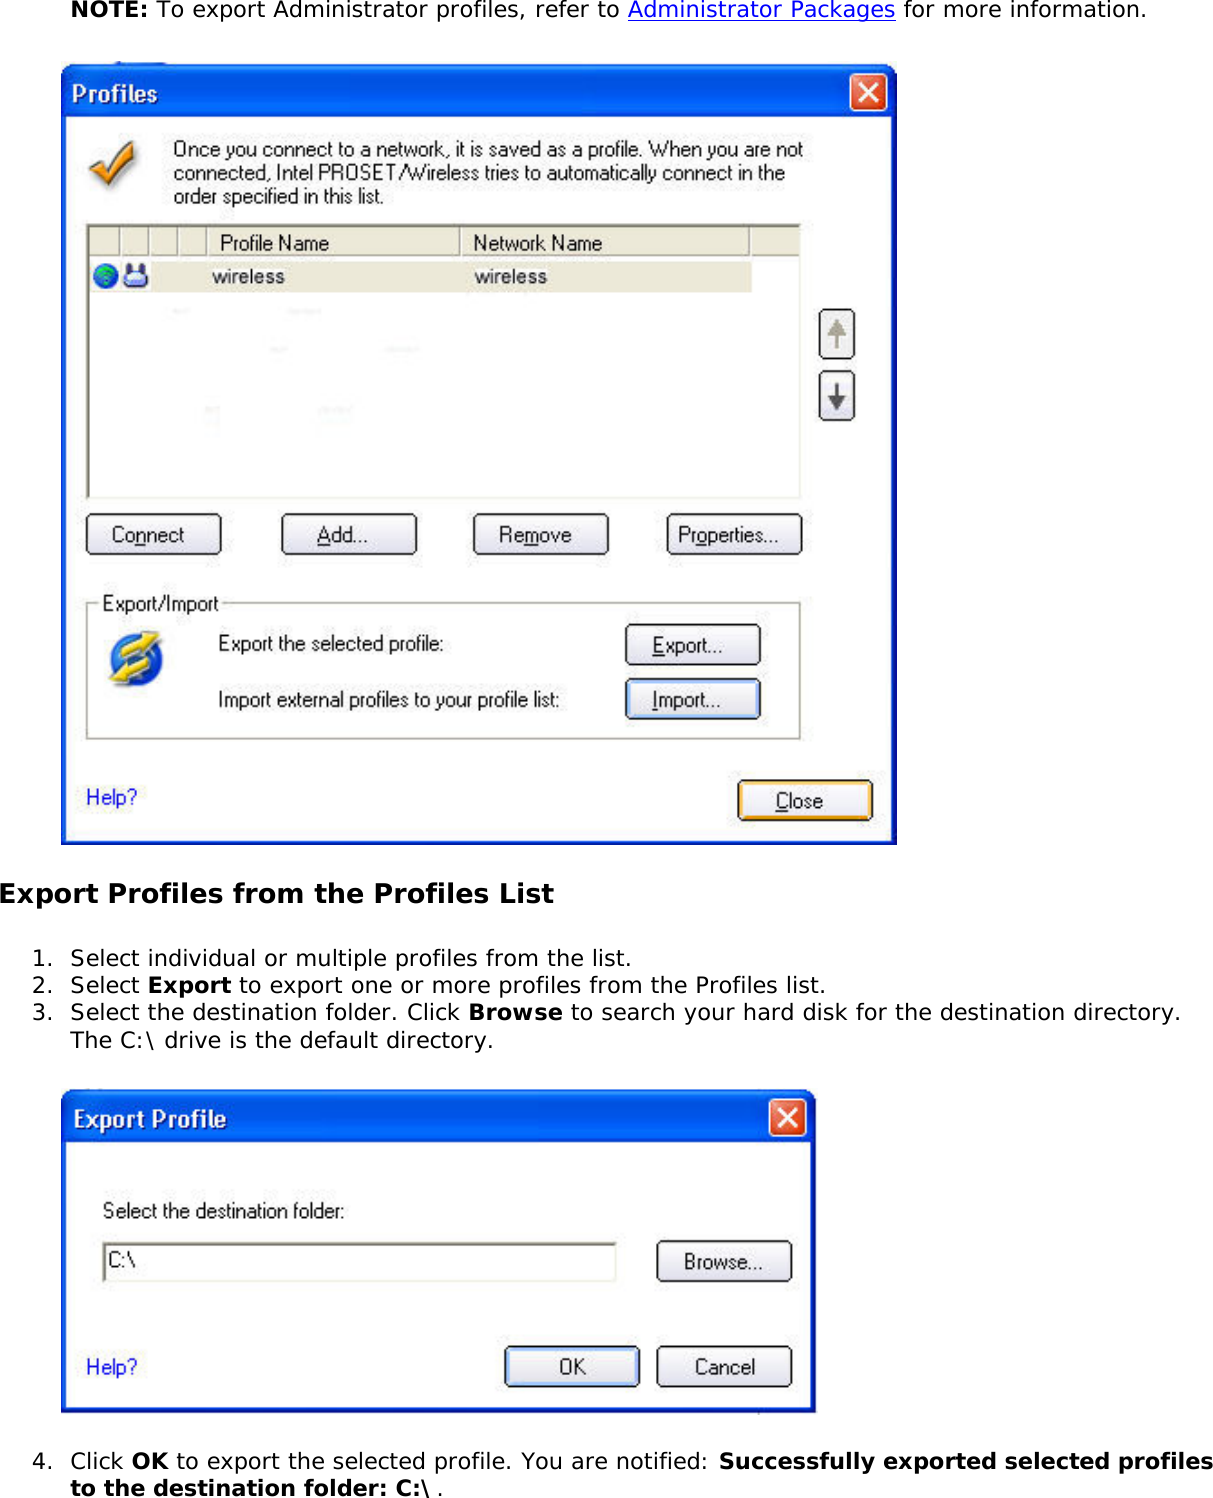 NOTE: To export Administrator profiles, refer to Administrator Packages for more information. Export Profiles from the Profiles List1.  Select individual or multiple profiles from the list. 2.  Select Export to export one or more profiles from the Profiles list.3.  Select the destination folder. Click Browse to search your hard disk for the destination directory. The C:\ drive is the default directory. 4.  Click OK to export the selected profile. You are notified: Successfully exported selected profiles to the destination folder: C:\.